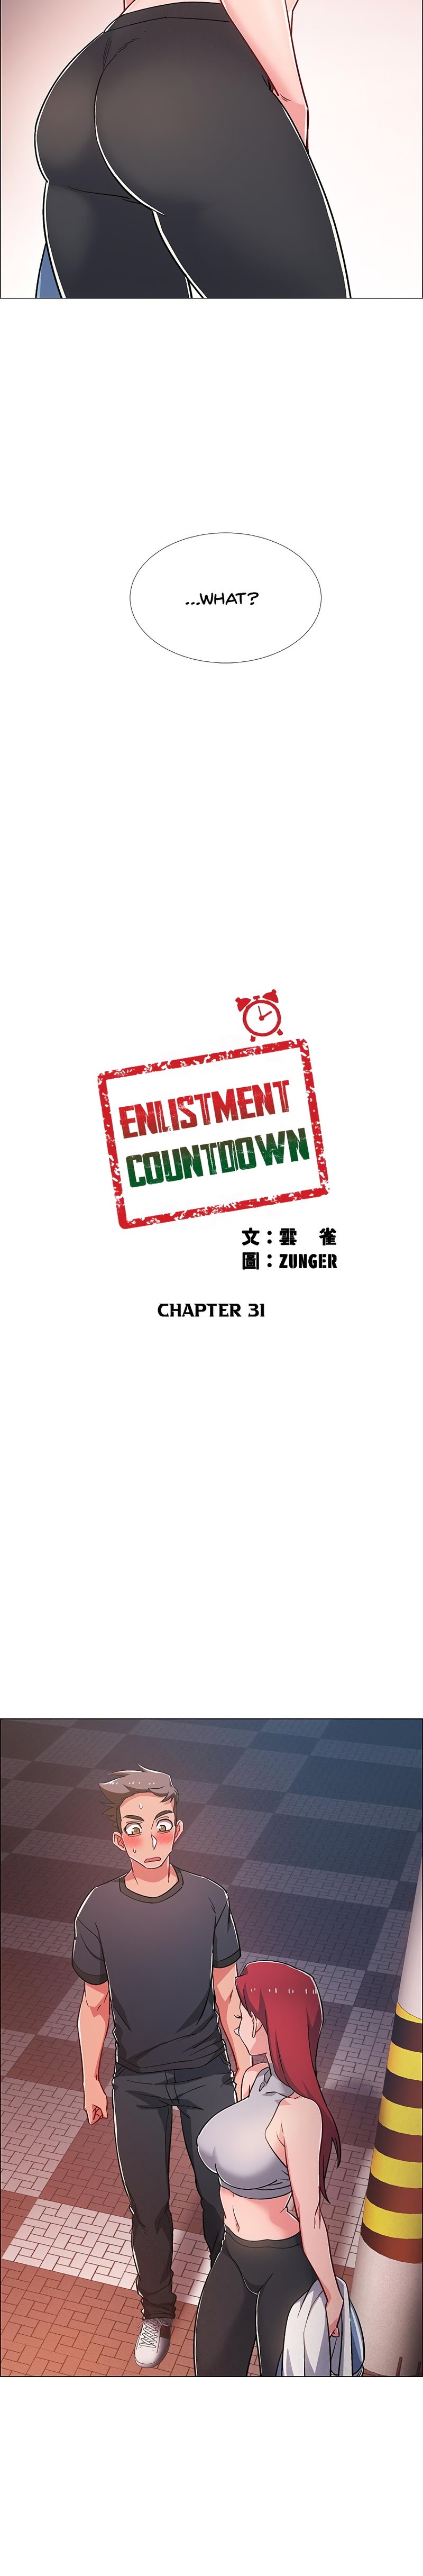 Enlistment Countdown - Chapter 31 Page 3